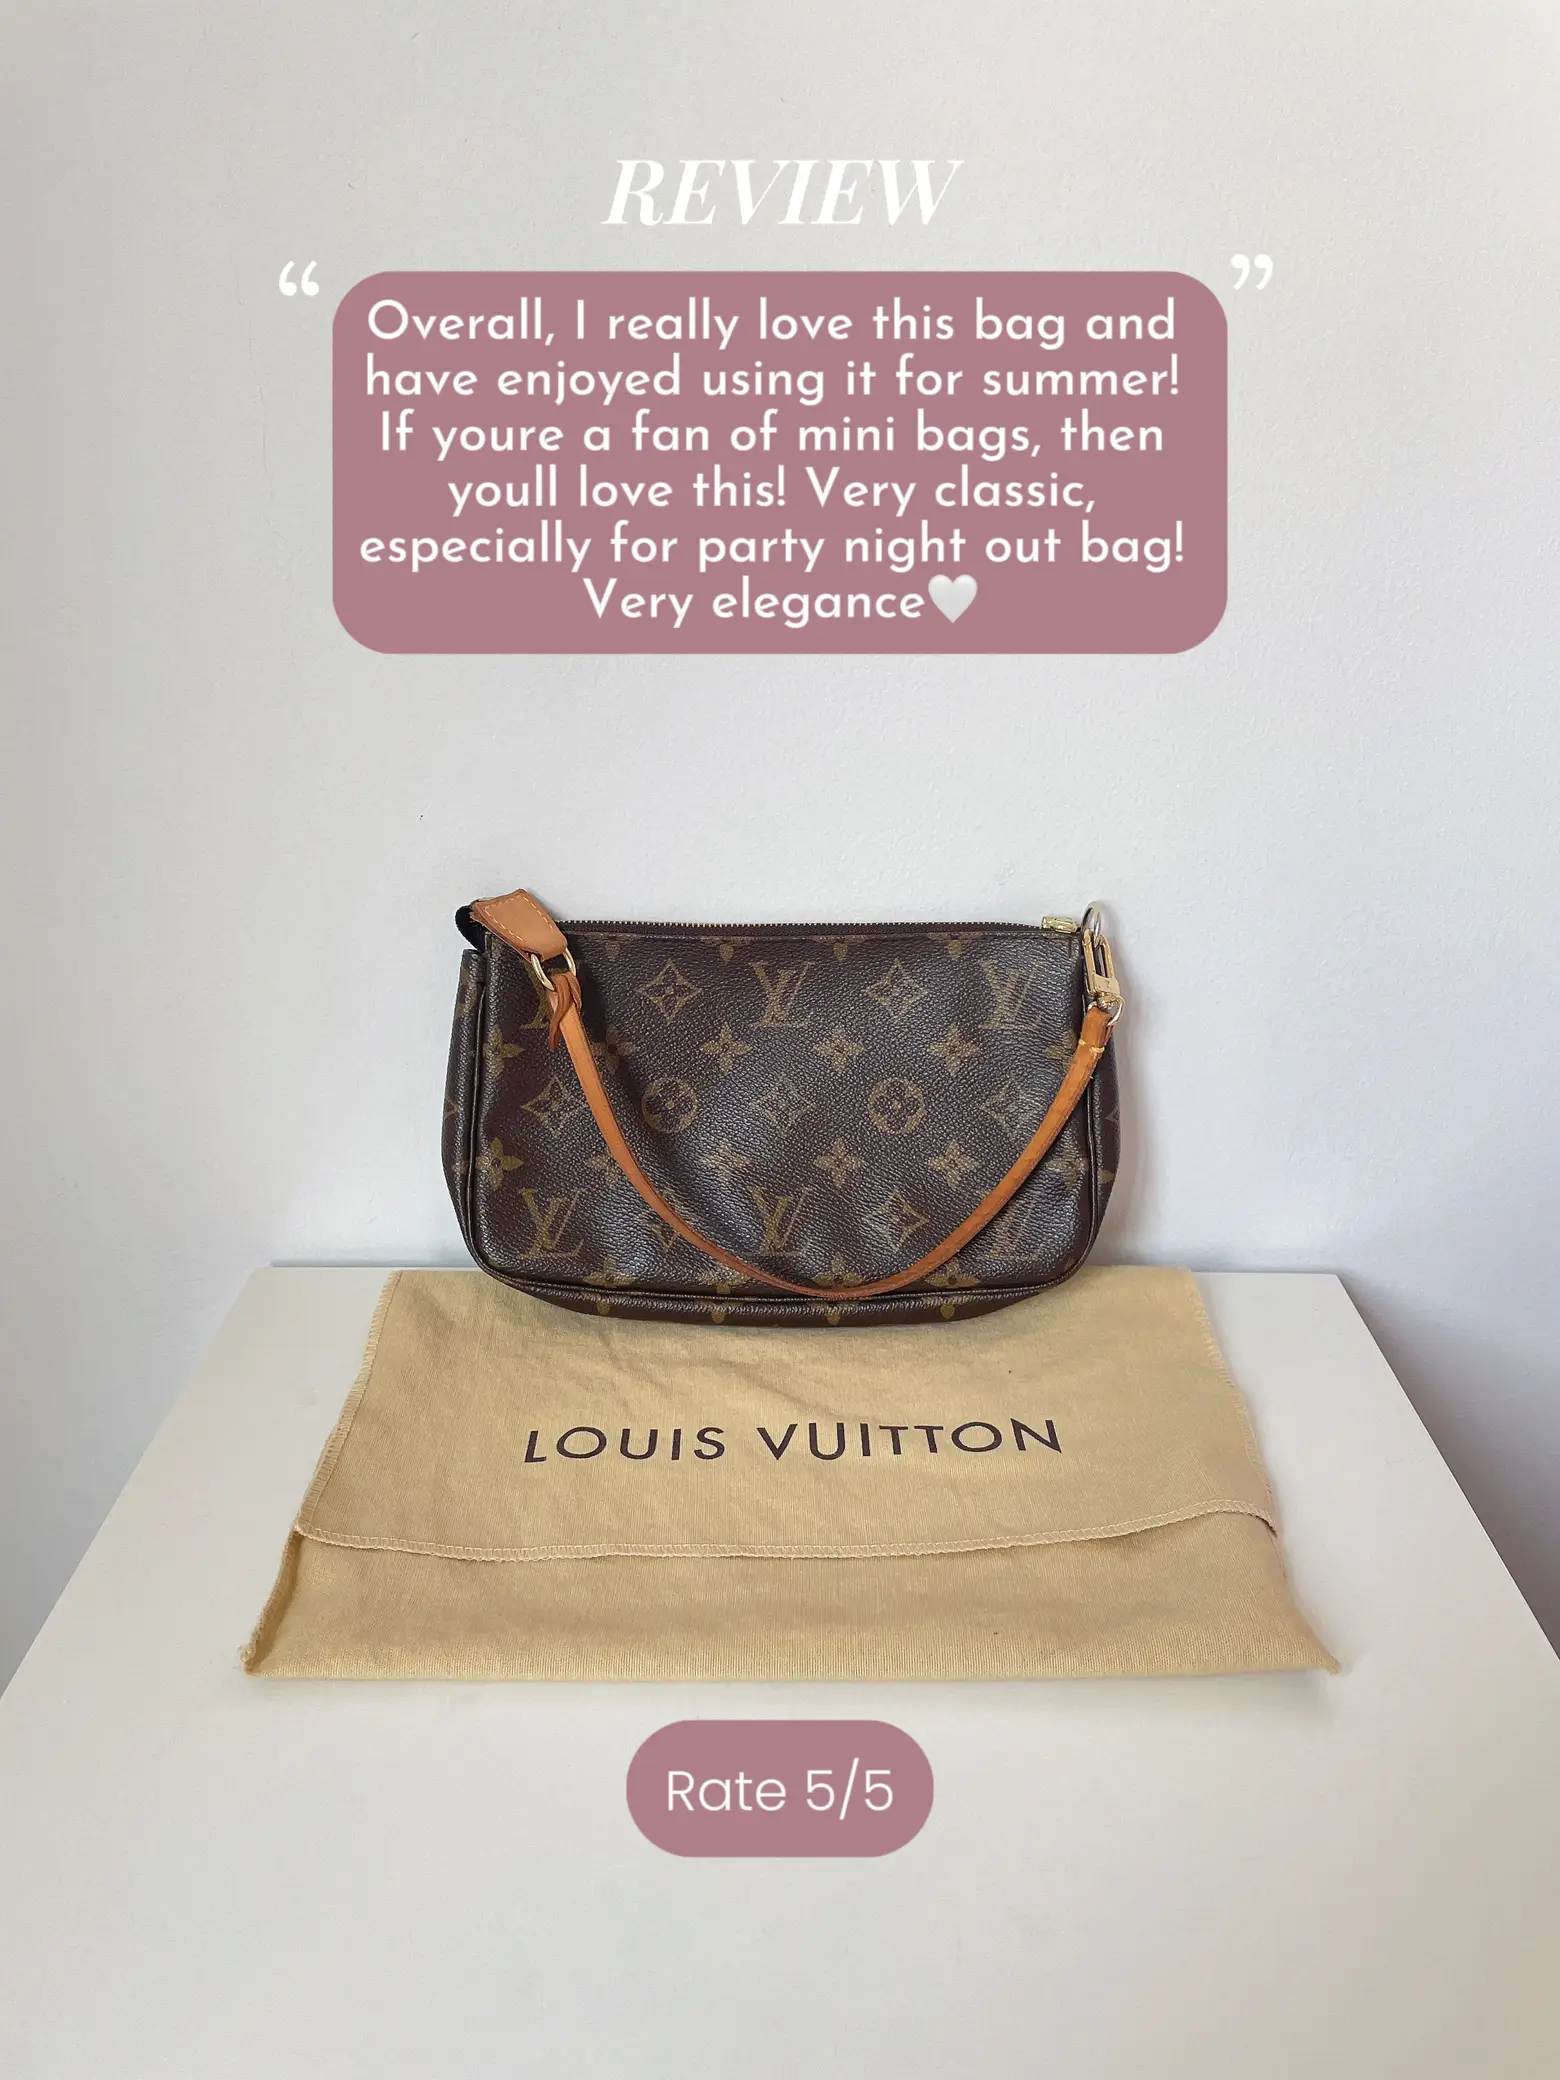 Louis Vuitton Felicie Chain Strap Review + OOTD Modelling Shots